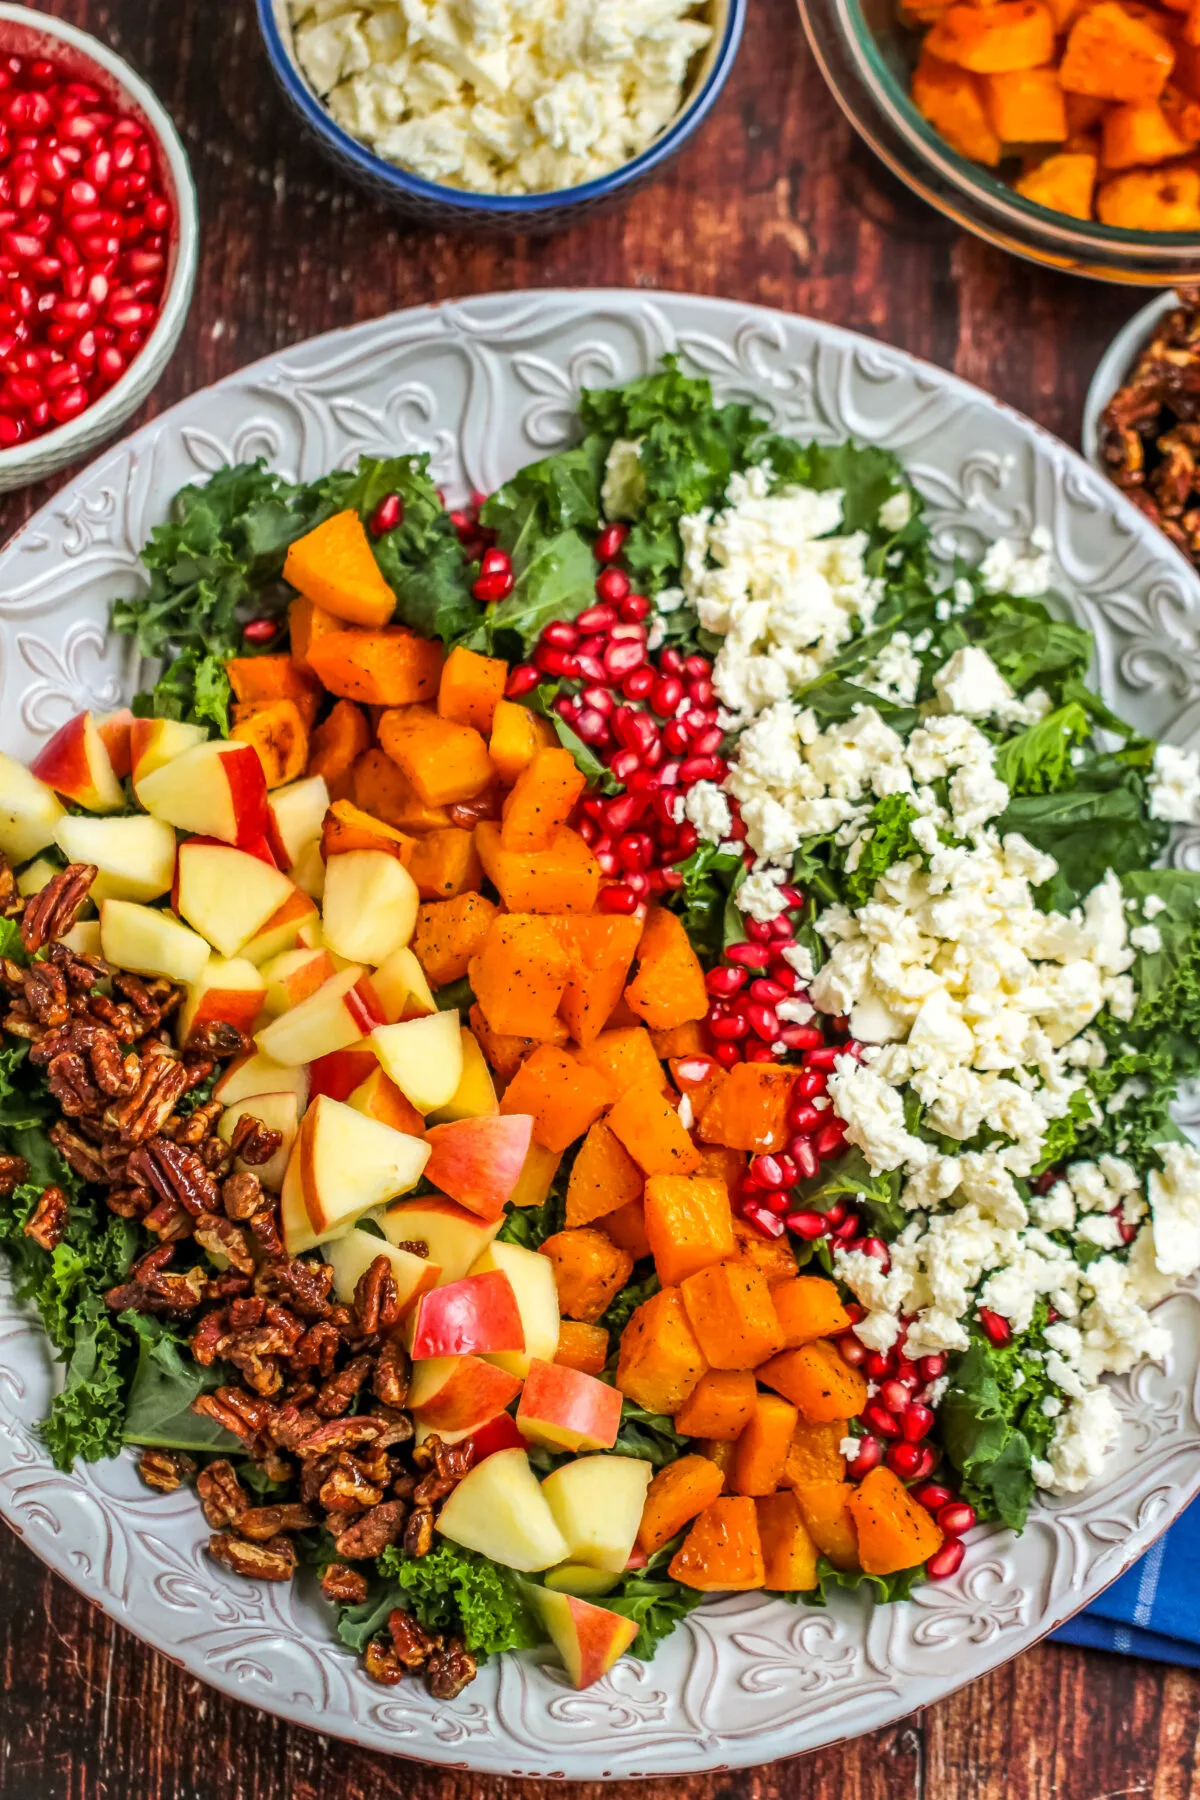 candy pecans, diced apples, roasted squash, pomegranate arils, and feta cheese on a bed of kale on a platter.